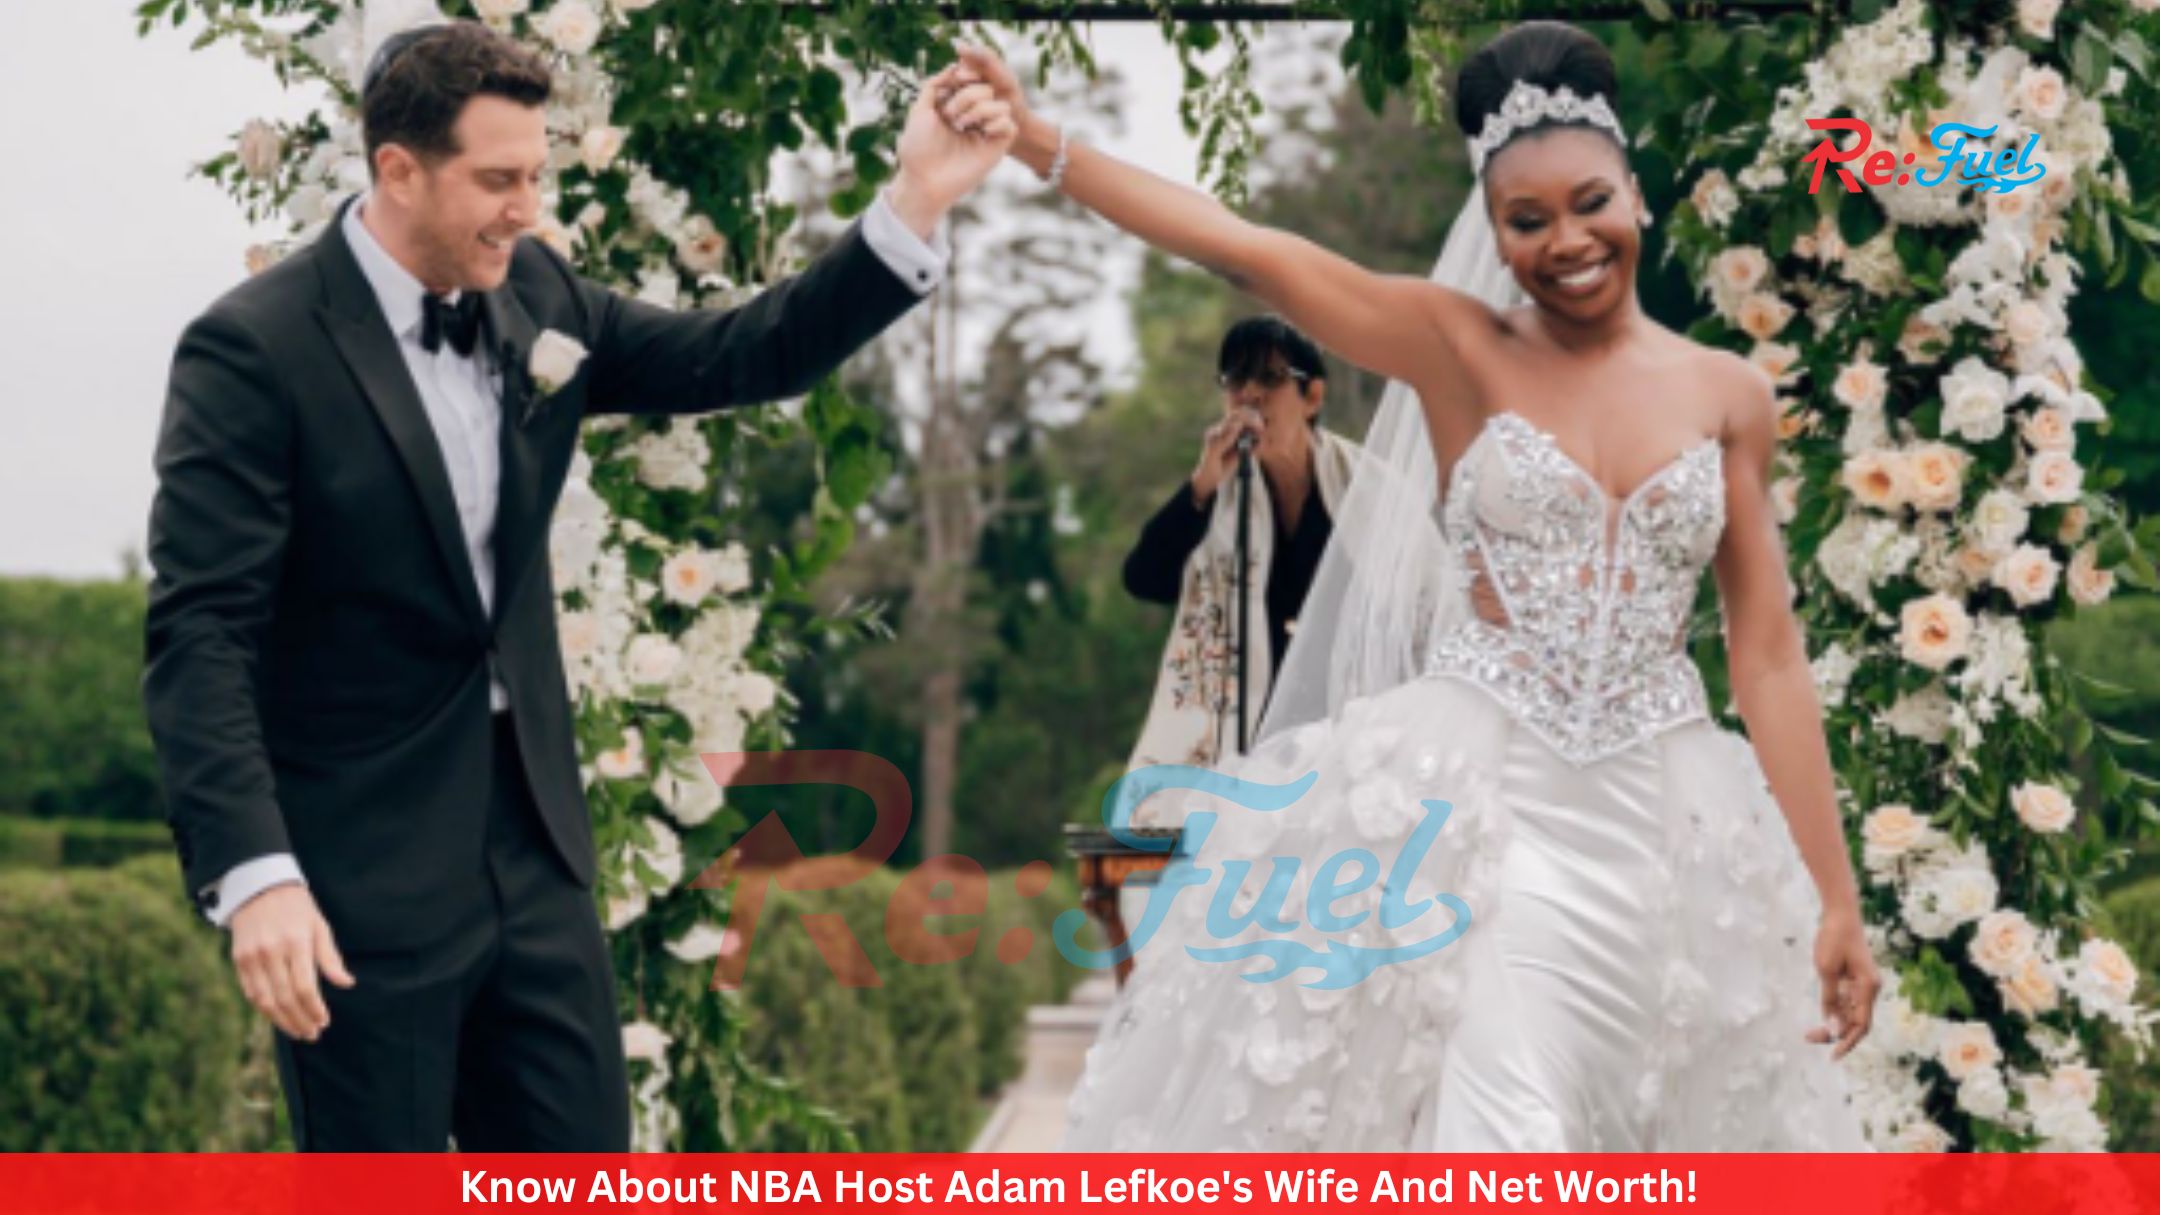 Know About NBA Host Adam Lefkoe's Wife And Net Worth!